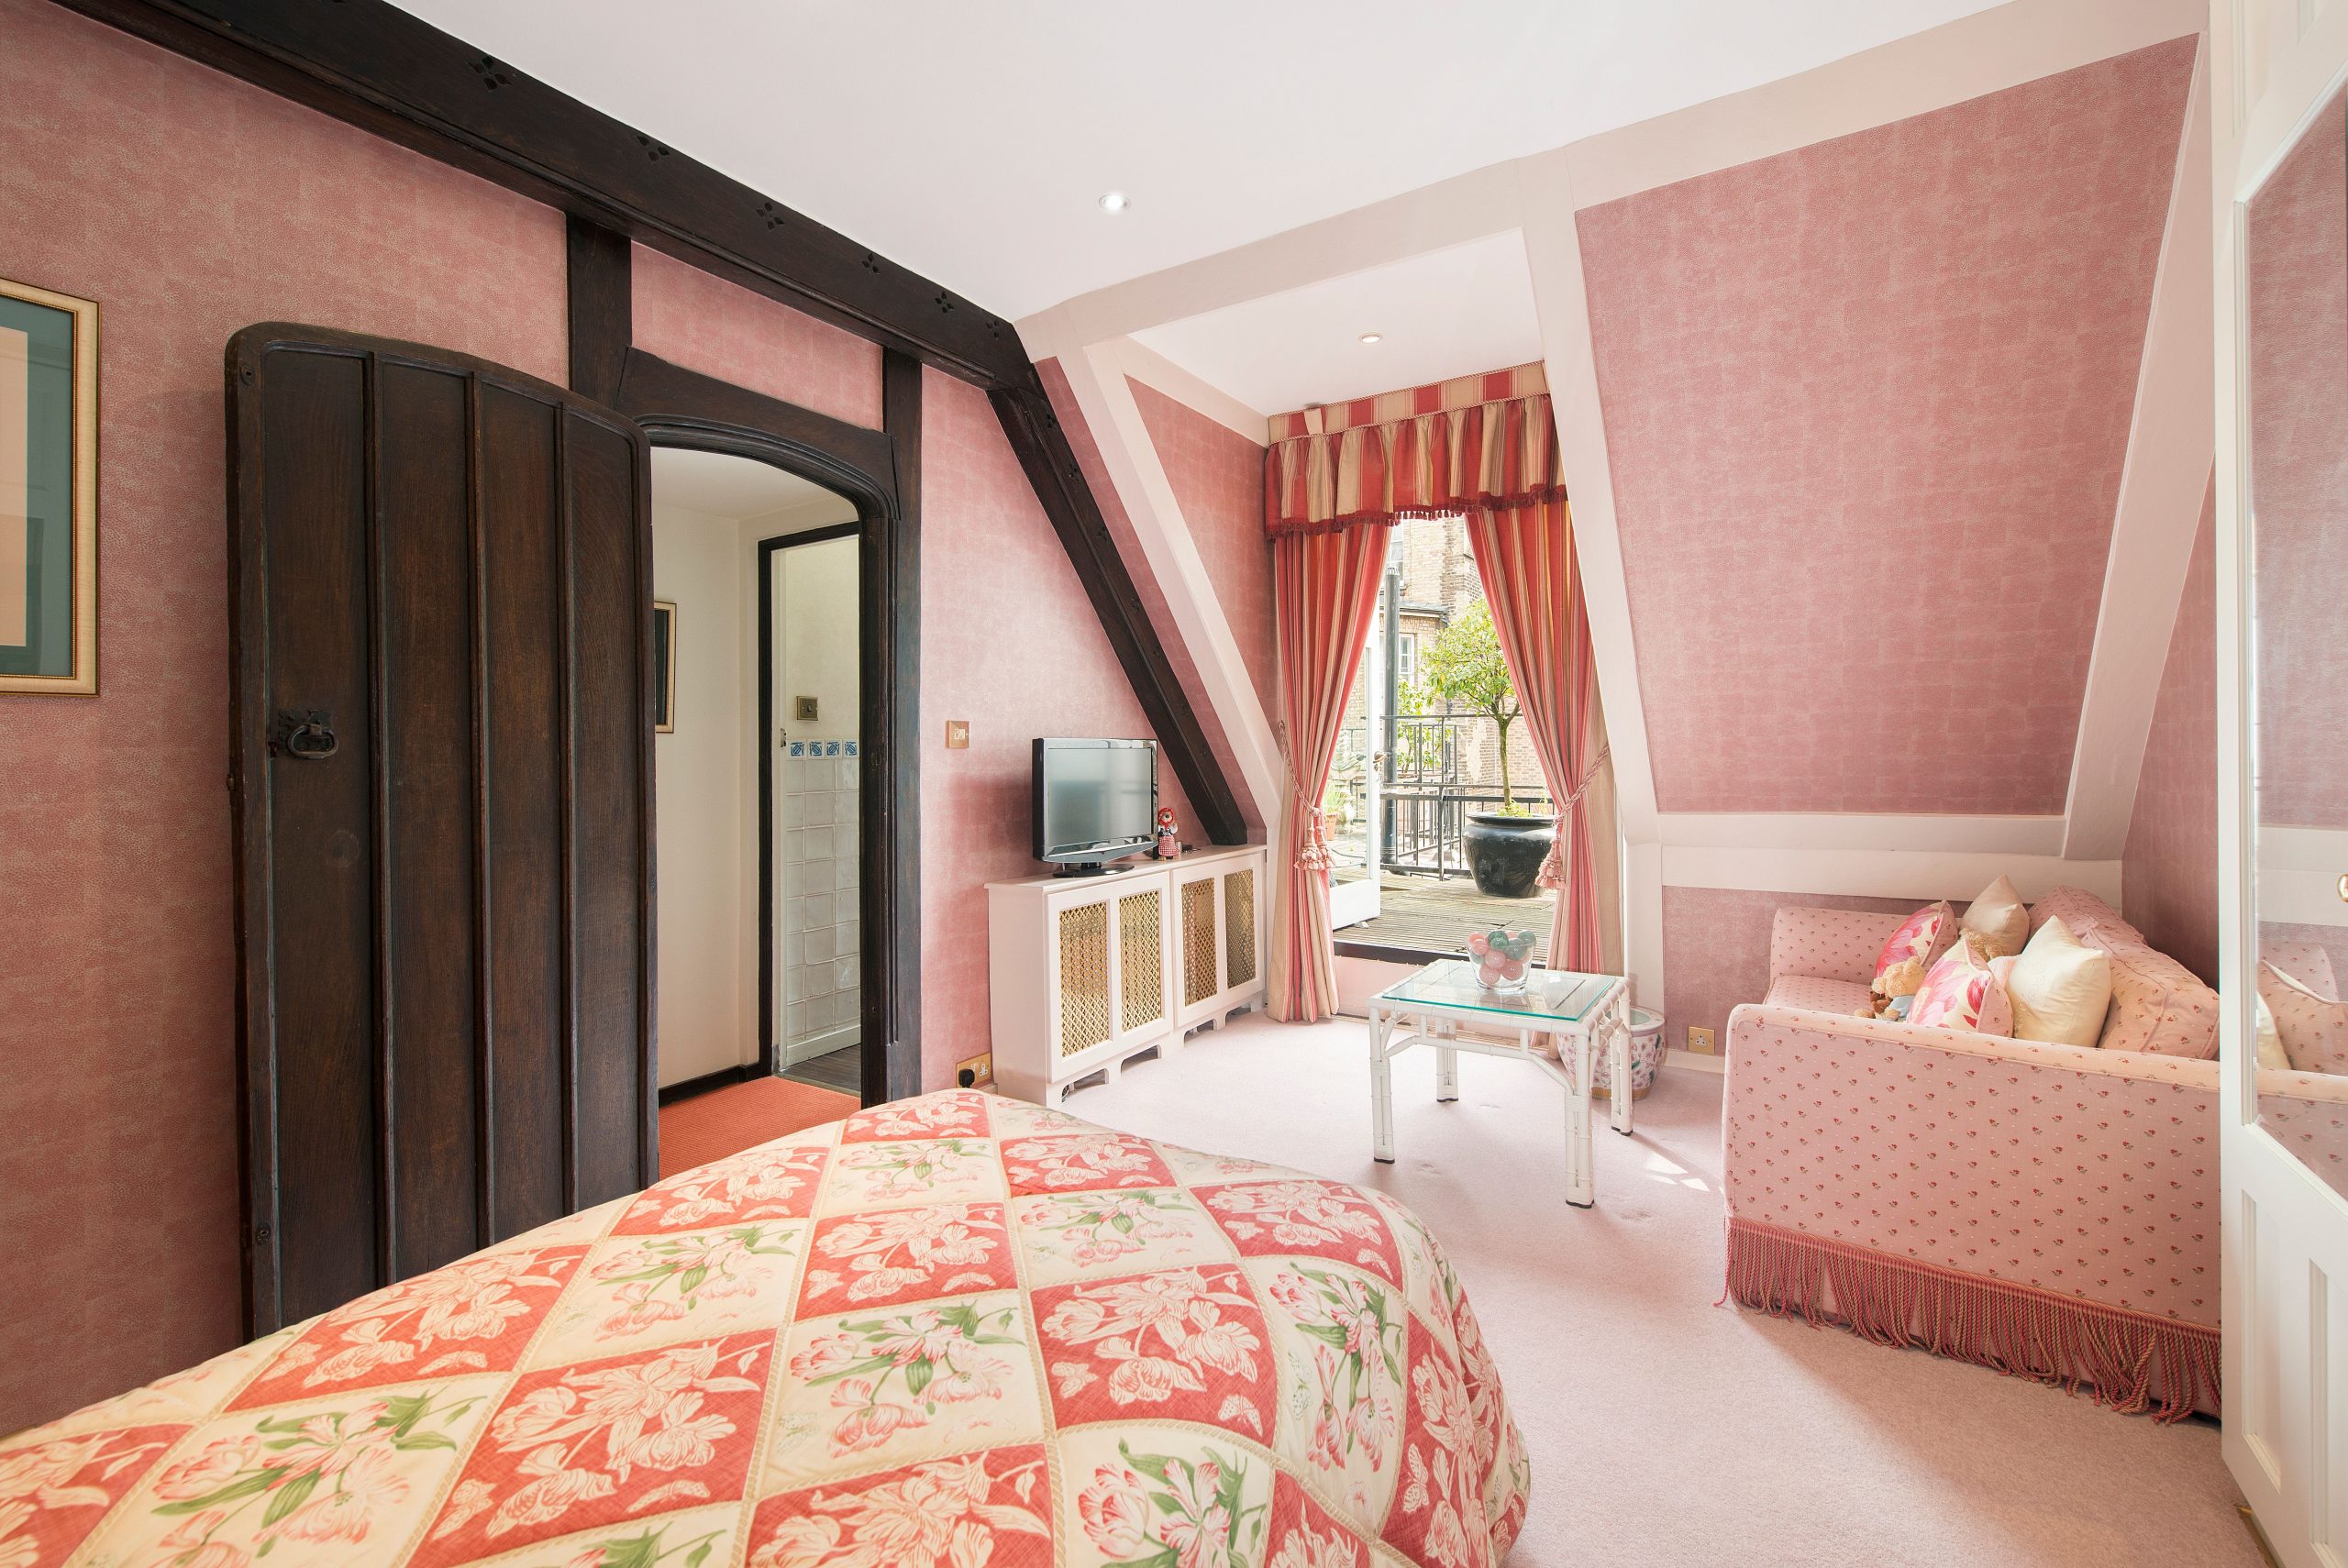 A pink bedroom in Farm House, Mayfair.